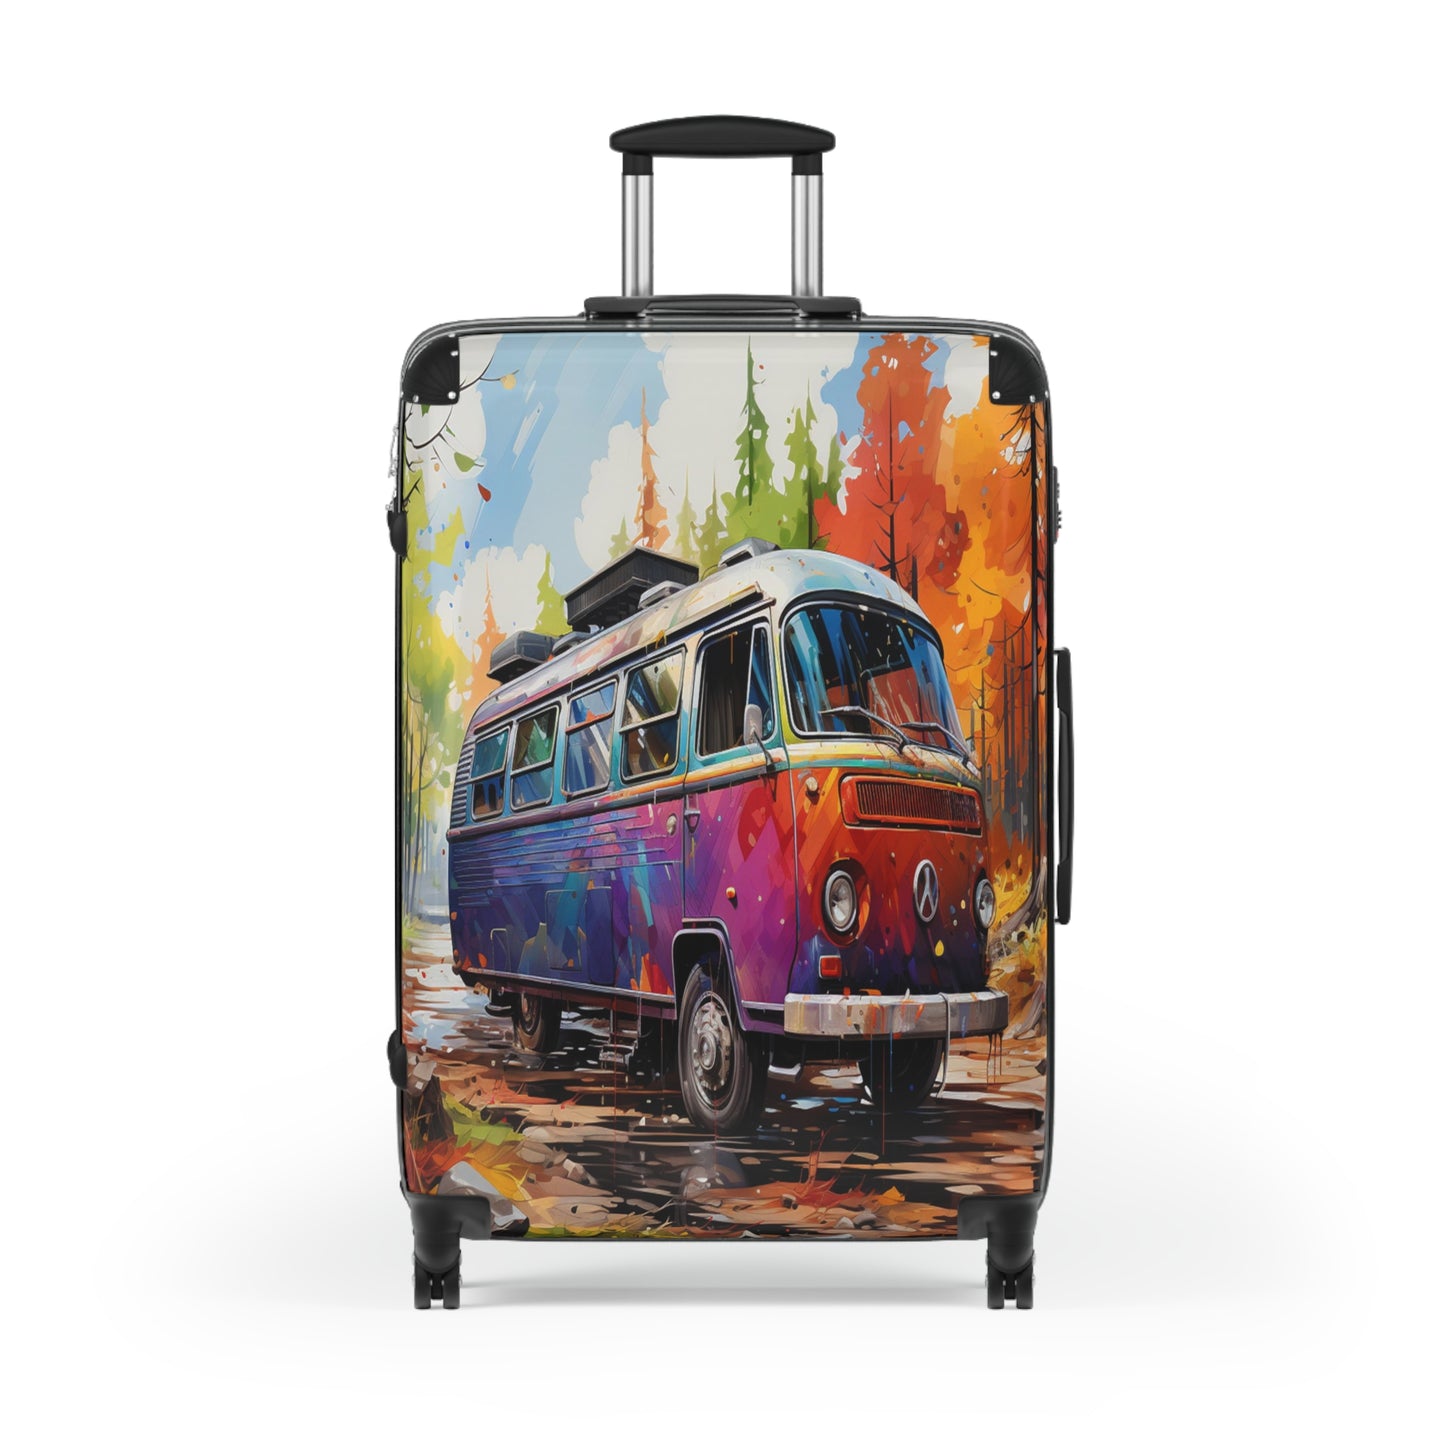 Bohemian Road Luggage | Hippie Trip Collection | Christmas vacation | Travel Luggage | Suitcase | Boho | Retro